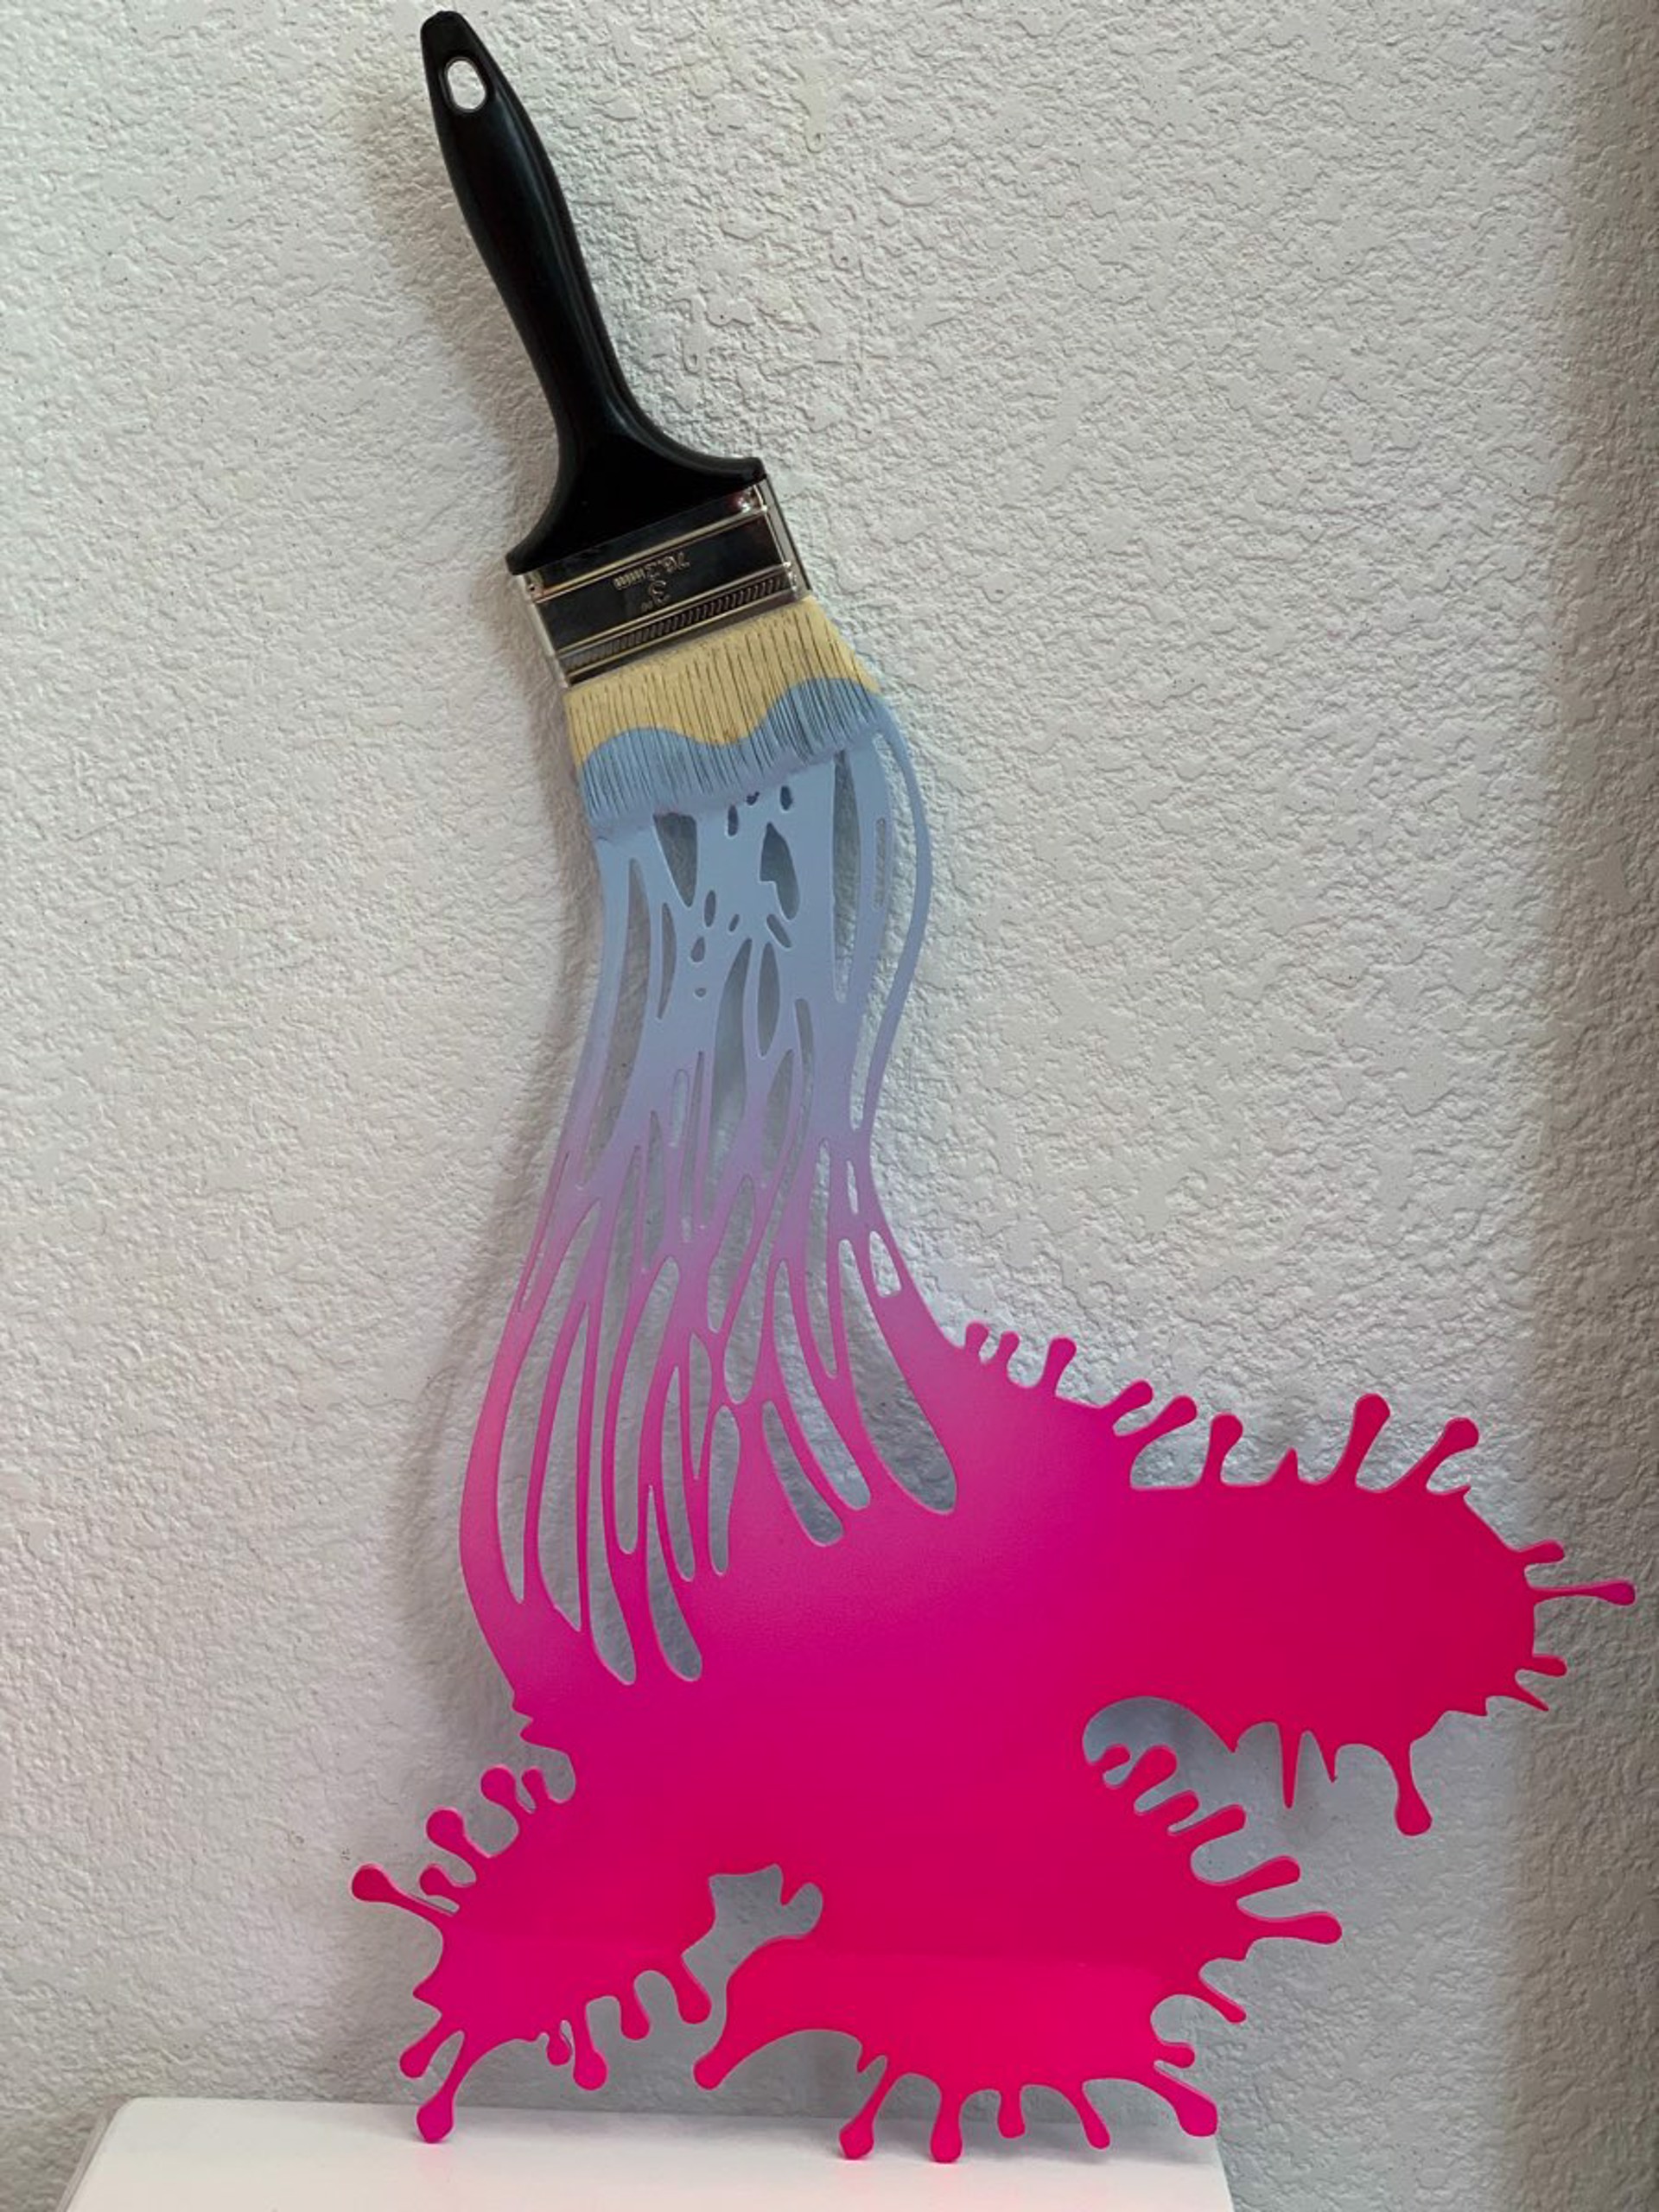 Blue/Pink Metal Large Brush  by Brushes and Rollers "Let's Paint" by Efi Mashiah